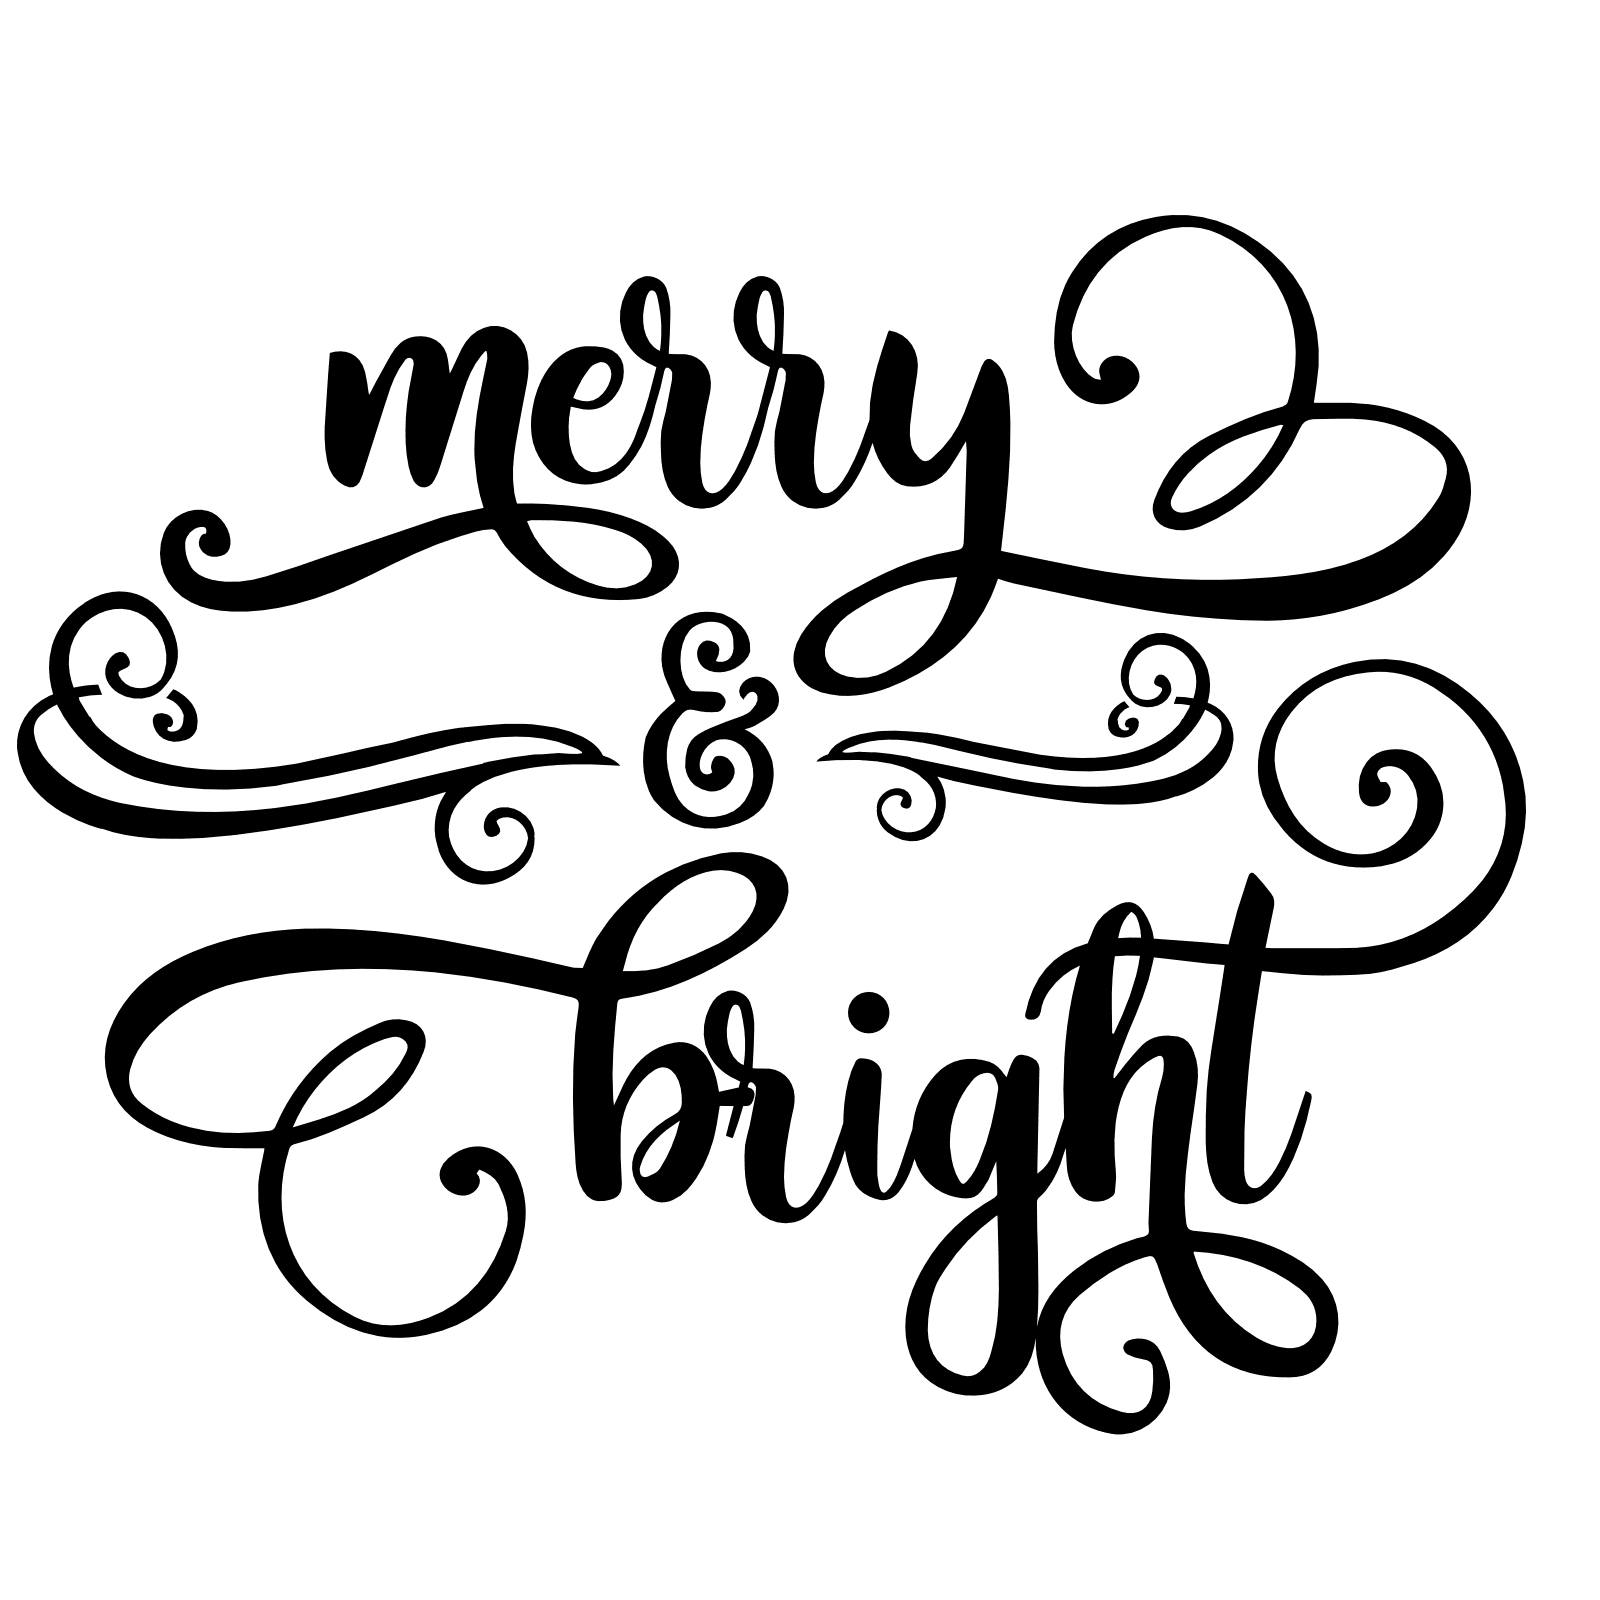 merry-and-bright-christmas-free-svg-file-SvgHeart.Com